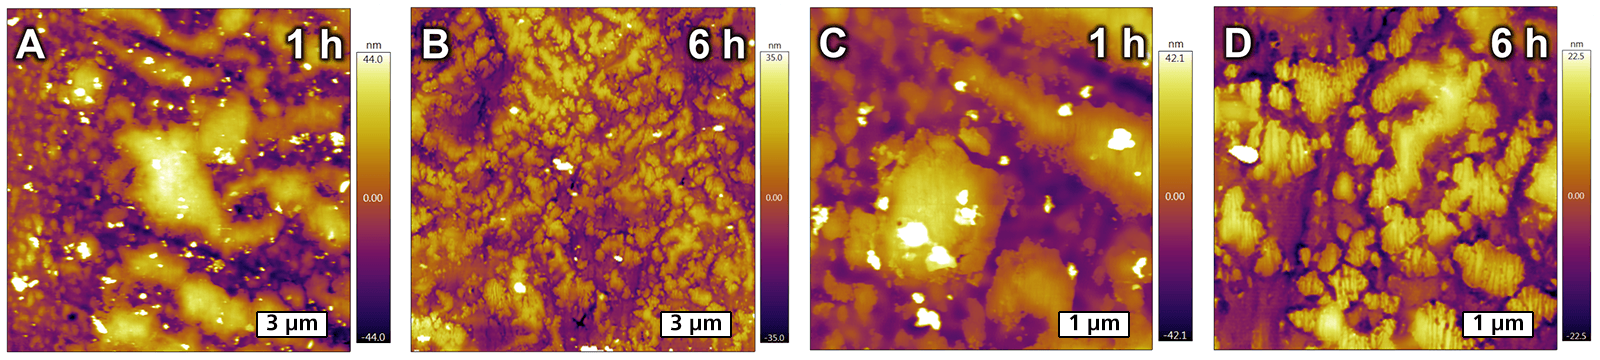 Topographic AFM images showing the evolution of a tribofilm over six hours